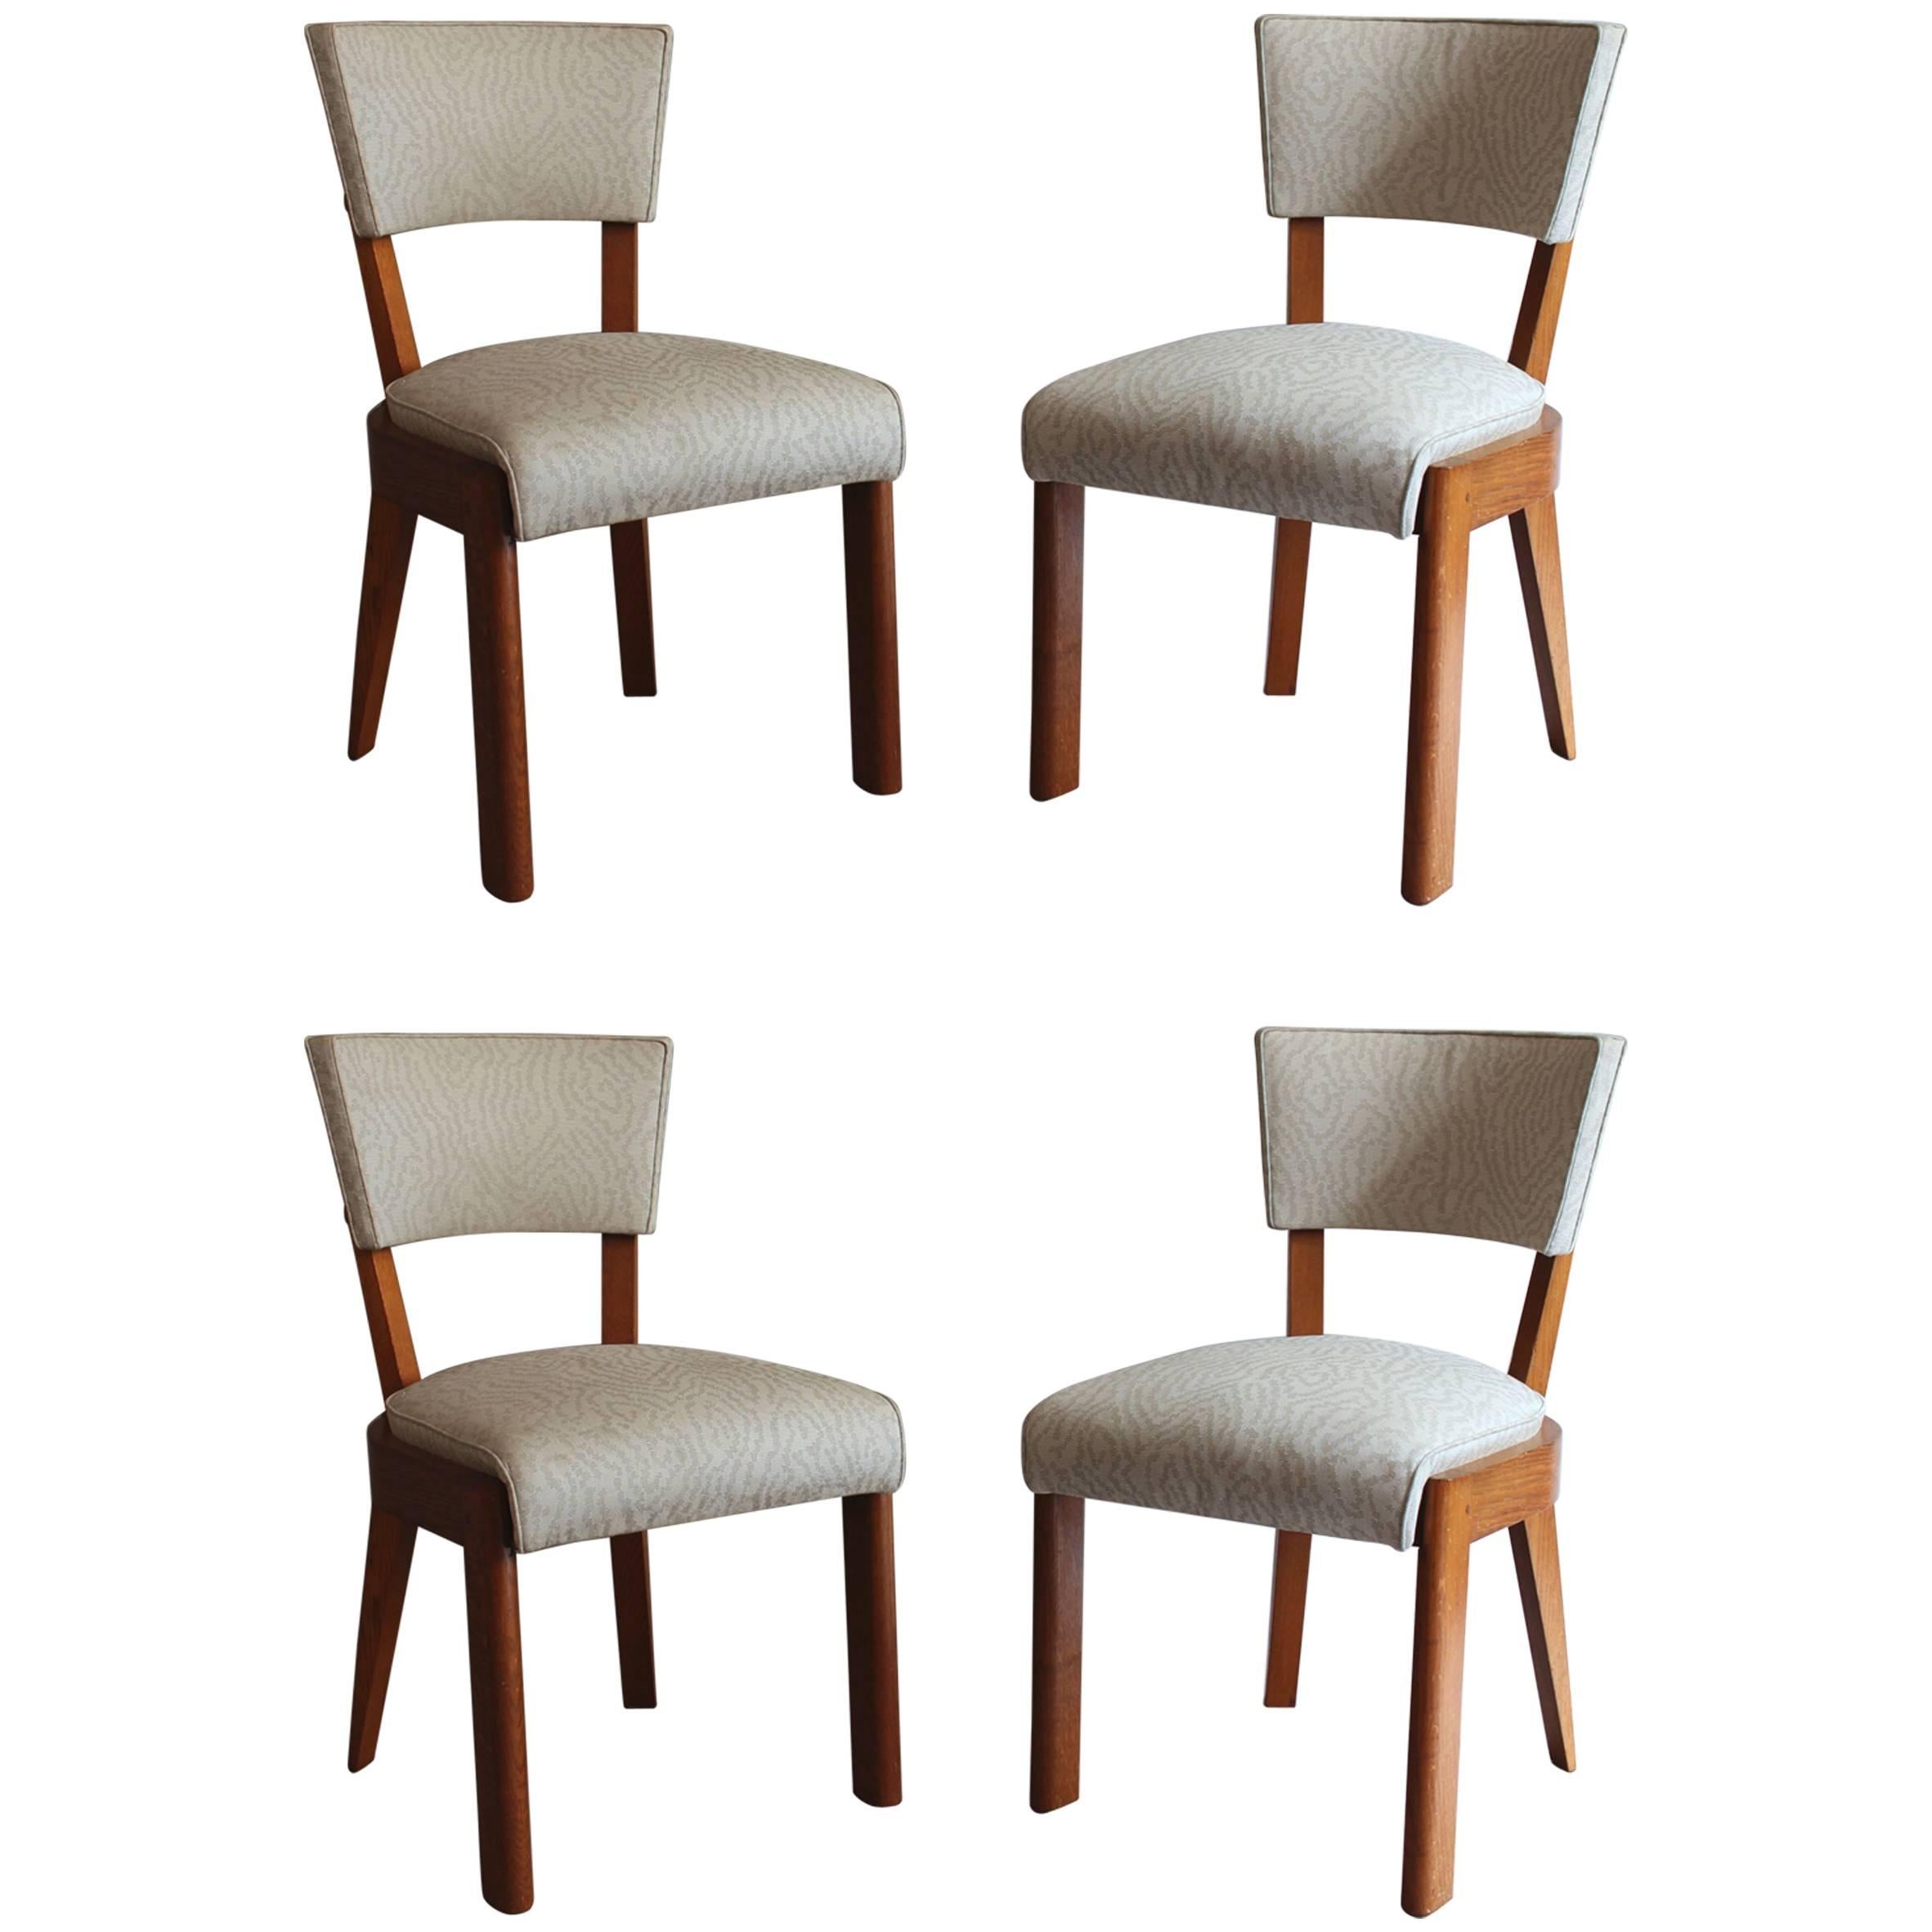 A pair of Fine French Art Deco Oak Chairs by Charles Dudouyt